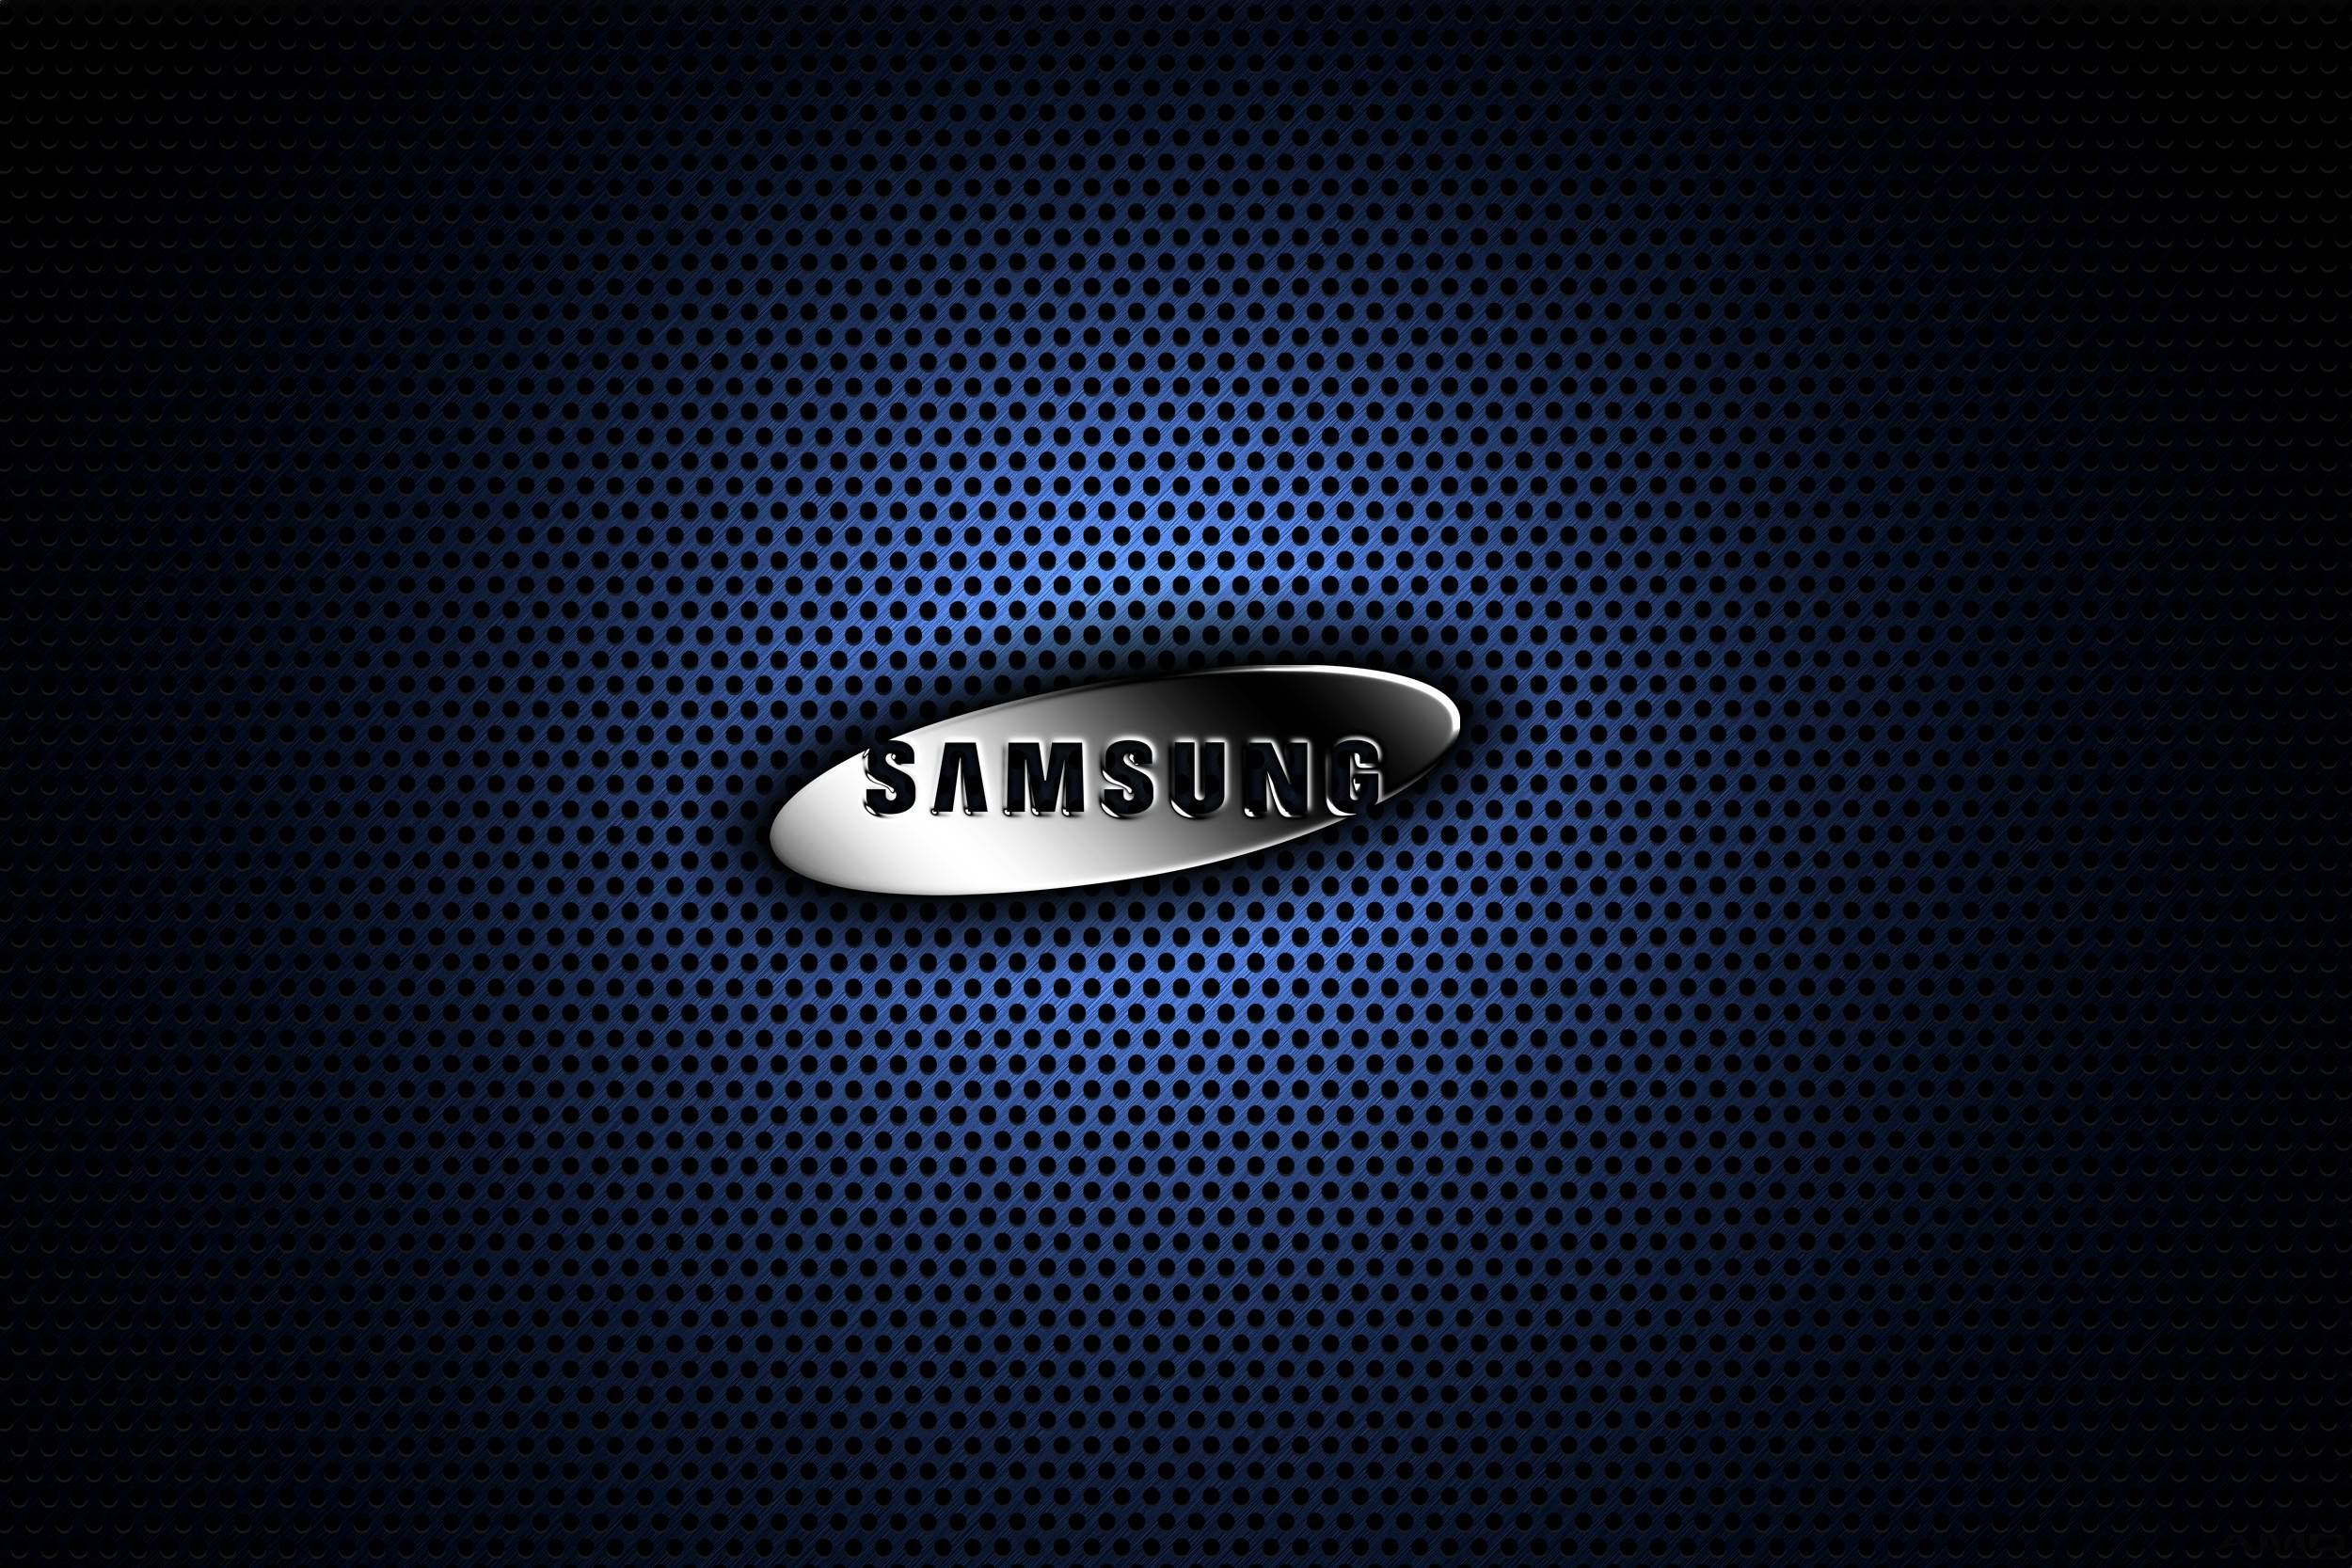 Samsung Wallpapers Gallery - Wallpaper Cave